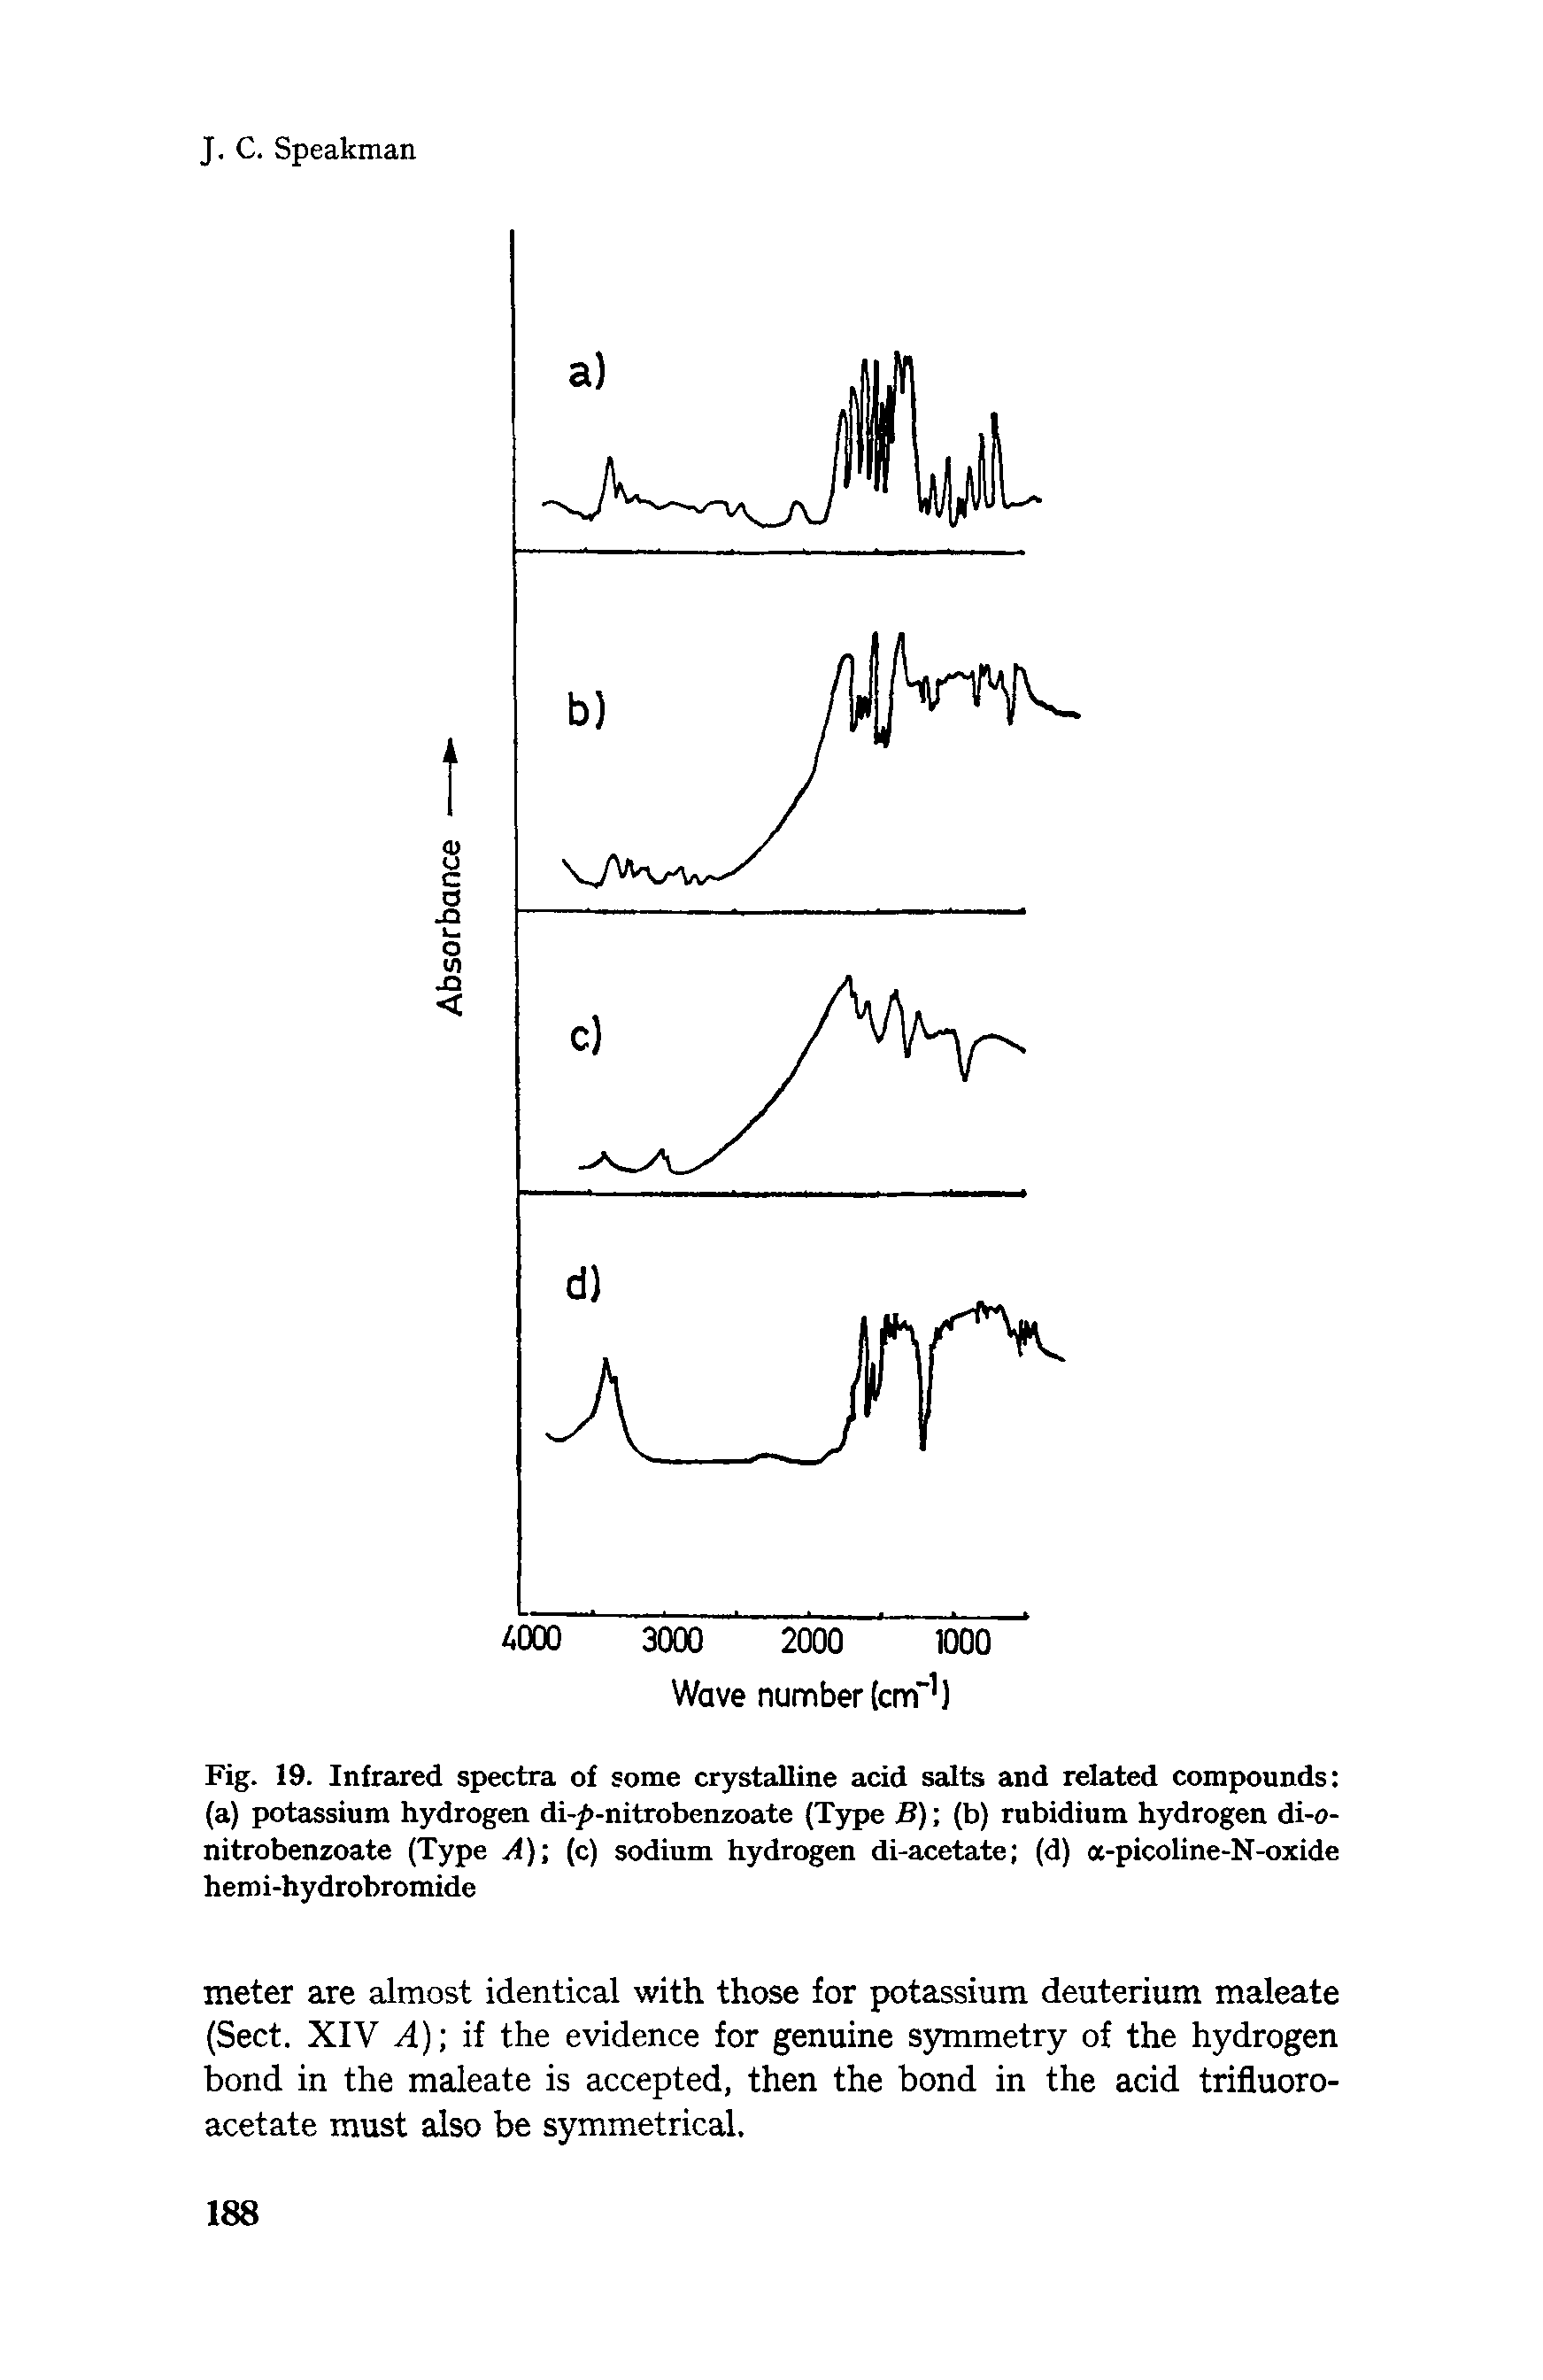 Fig. 19. Infrared spectra of some crystalline acid salts and related compounds (a) potassium hydrogen di-p-nitrobenzoate (Type B) (b) rubidium hydrogen di-o-nitrobenzoate (Type A) (c) sodium hydrogen di-acetate (d) a-picoline-N-oxide hemi-hydrobromide...